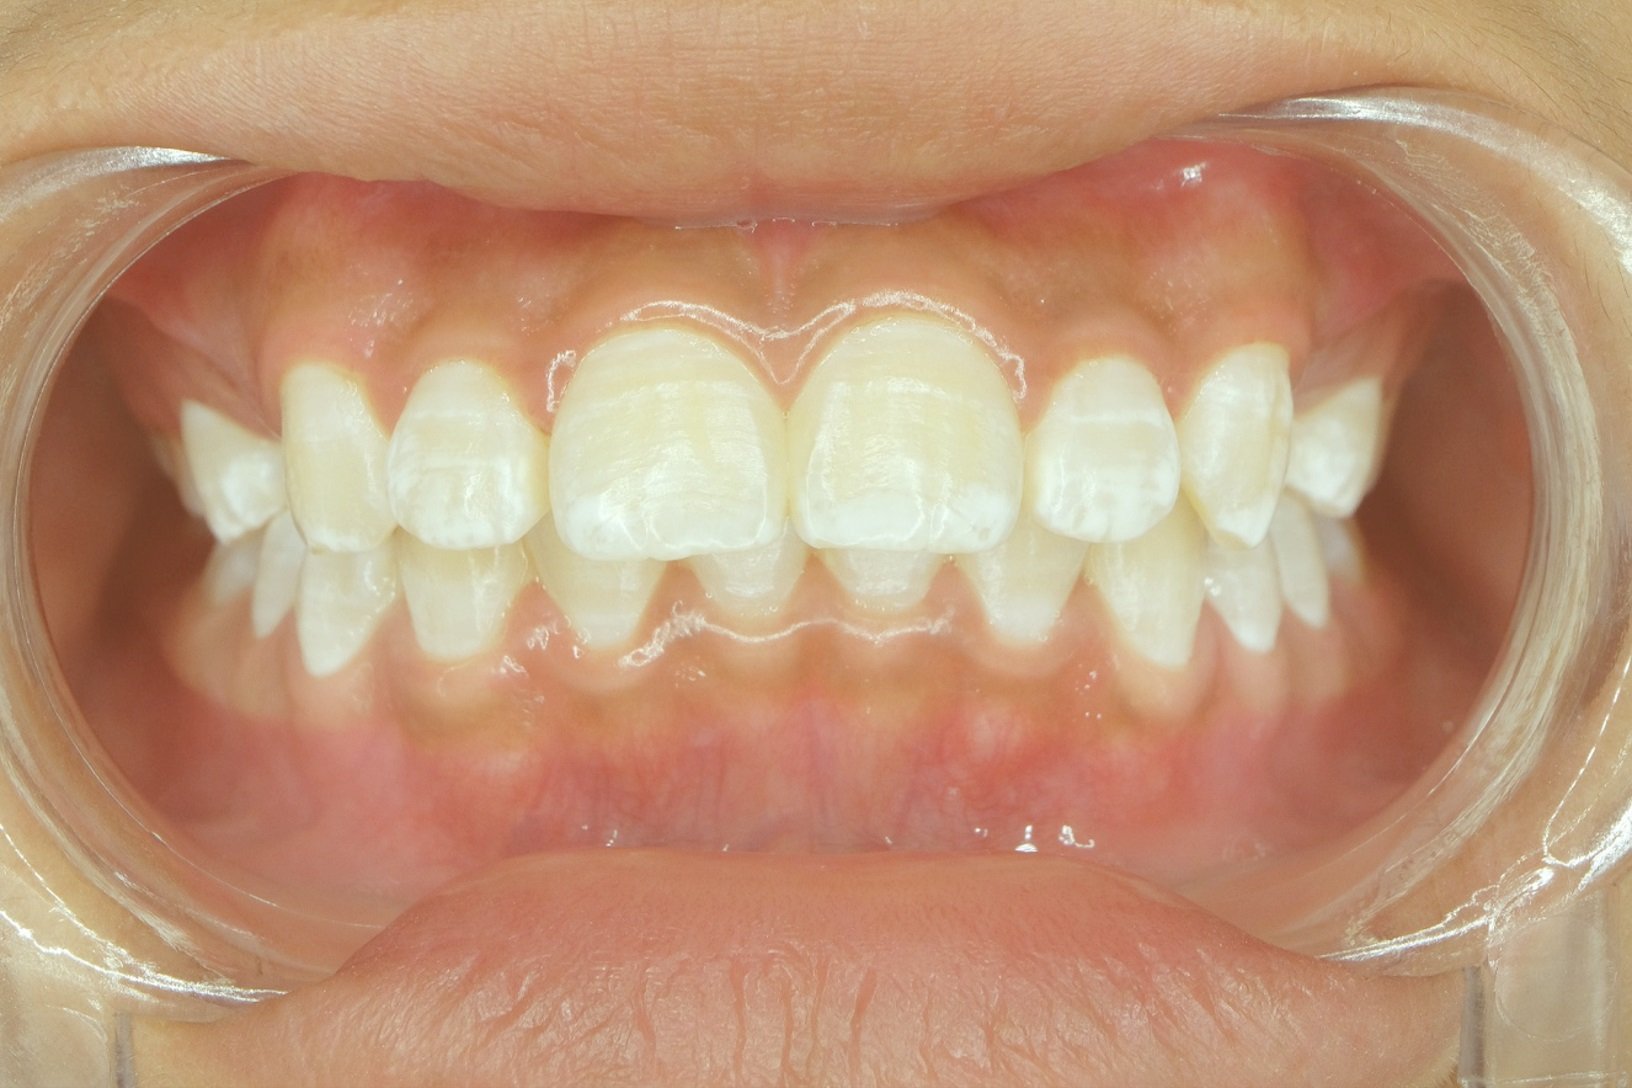 Oceanien Såvel læbe White Spots on Teeth - Causes, Treatment, and Prevention